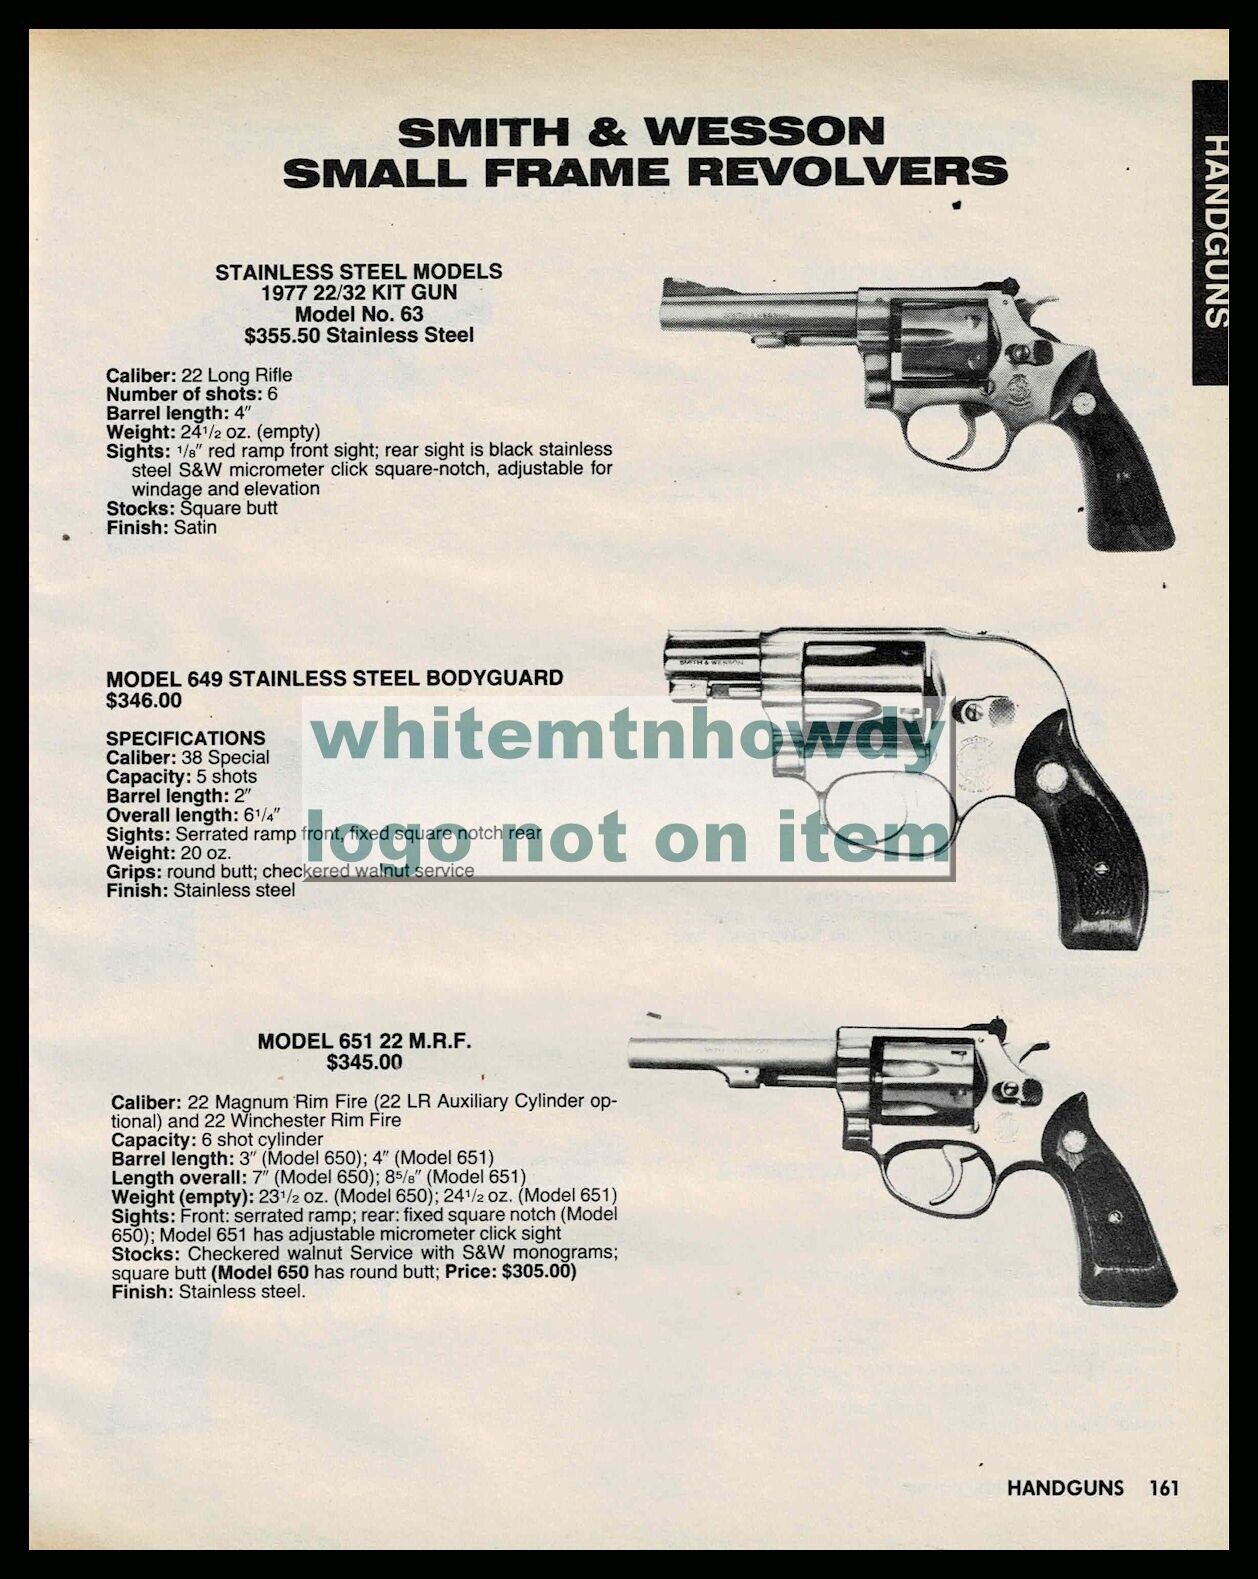 1987 SMITH & WESSON Model 63, 649, 651 Revolver PRINT AD with specs